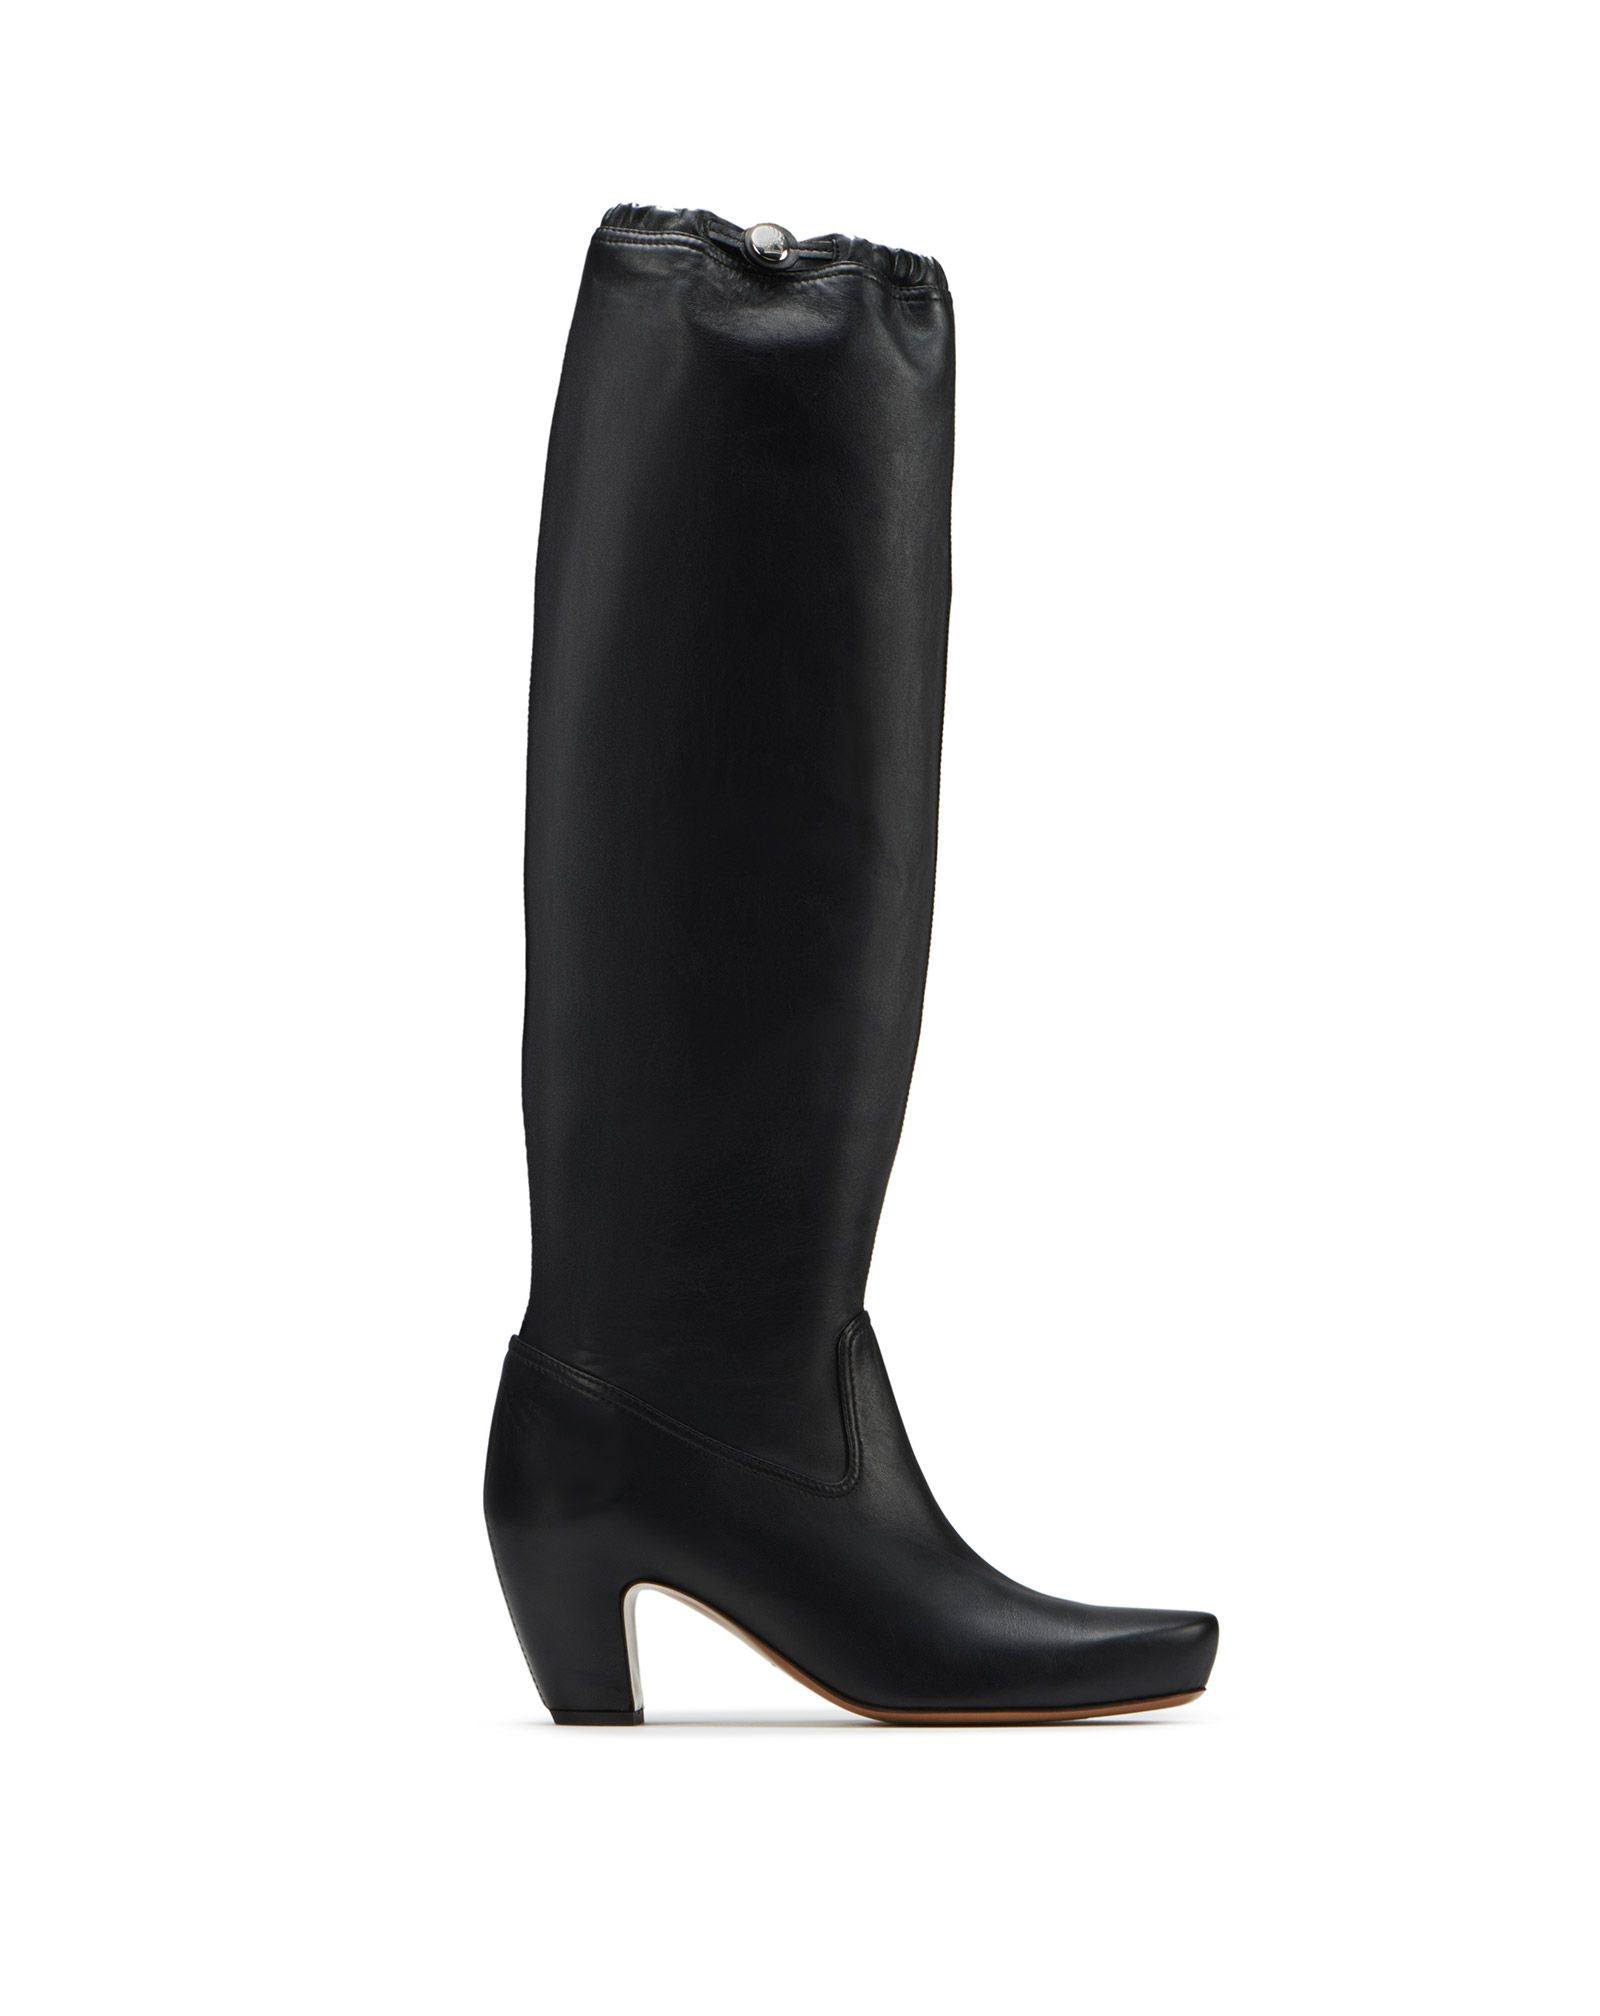 boots for women online